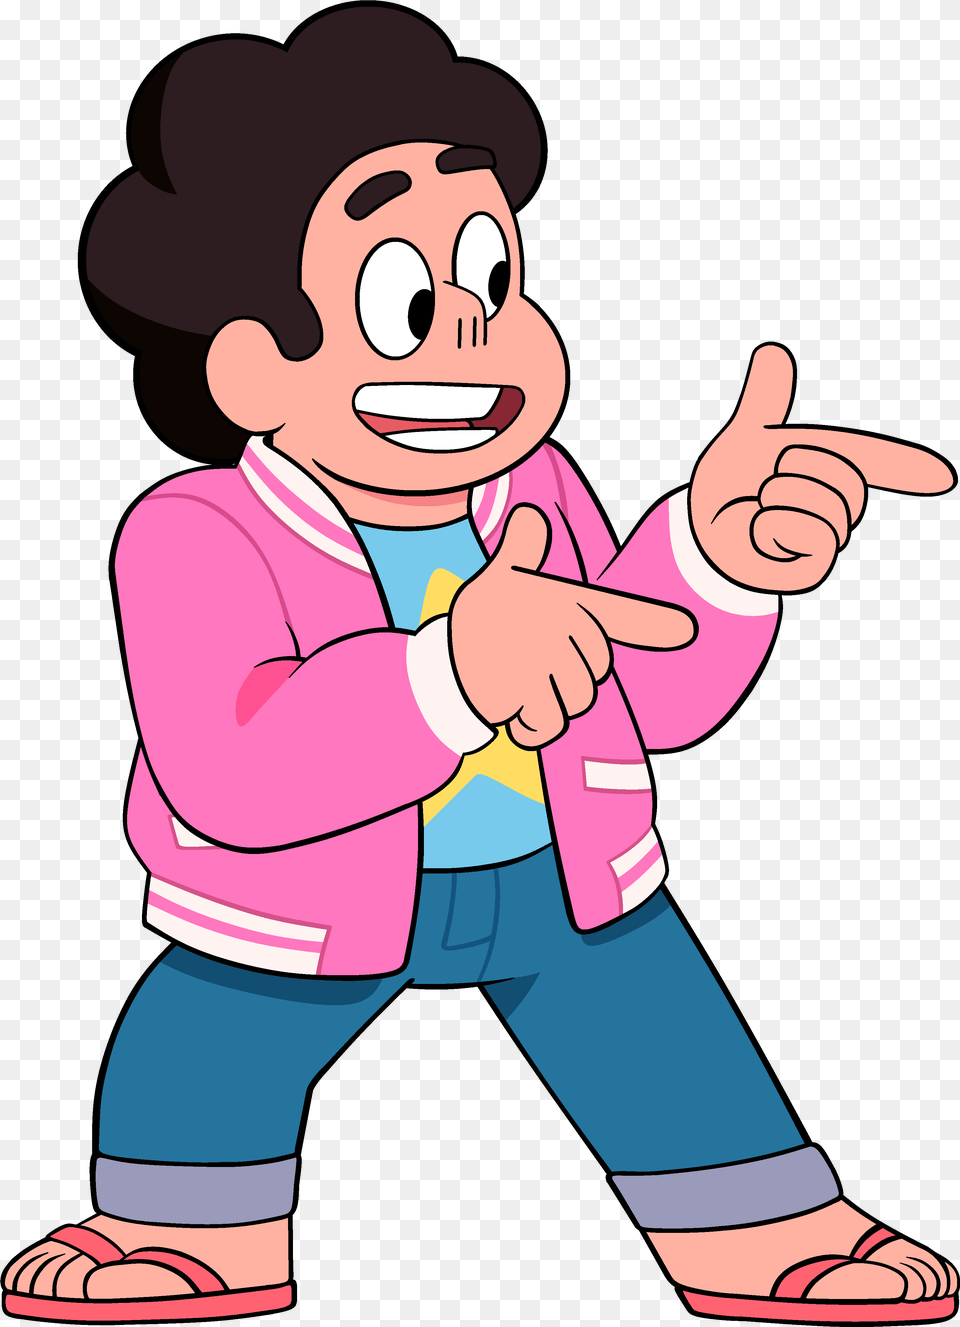 Gemcrust Wikia Steven Universe Amethyst And Steven, Baby, Person, Cartoon, Face Png